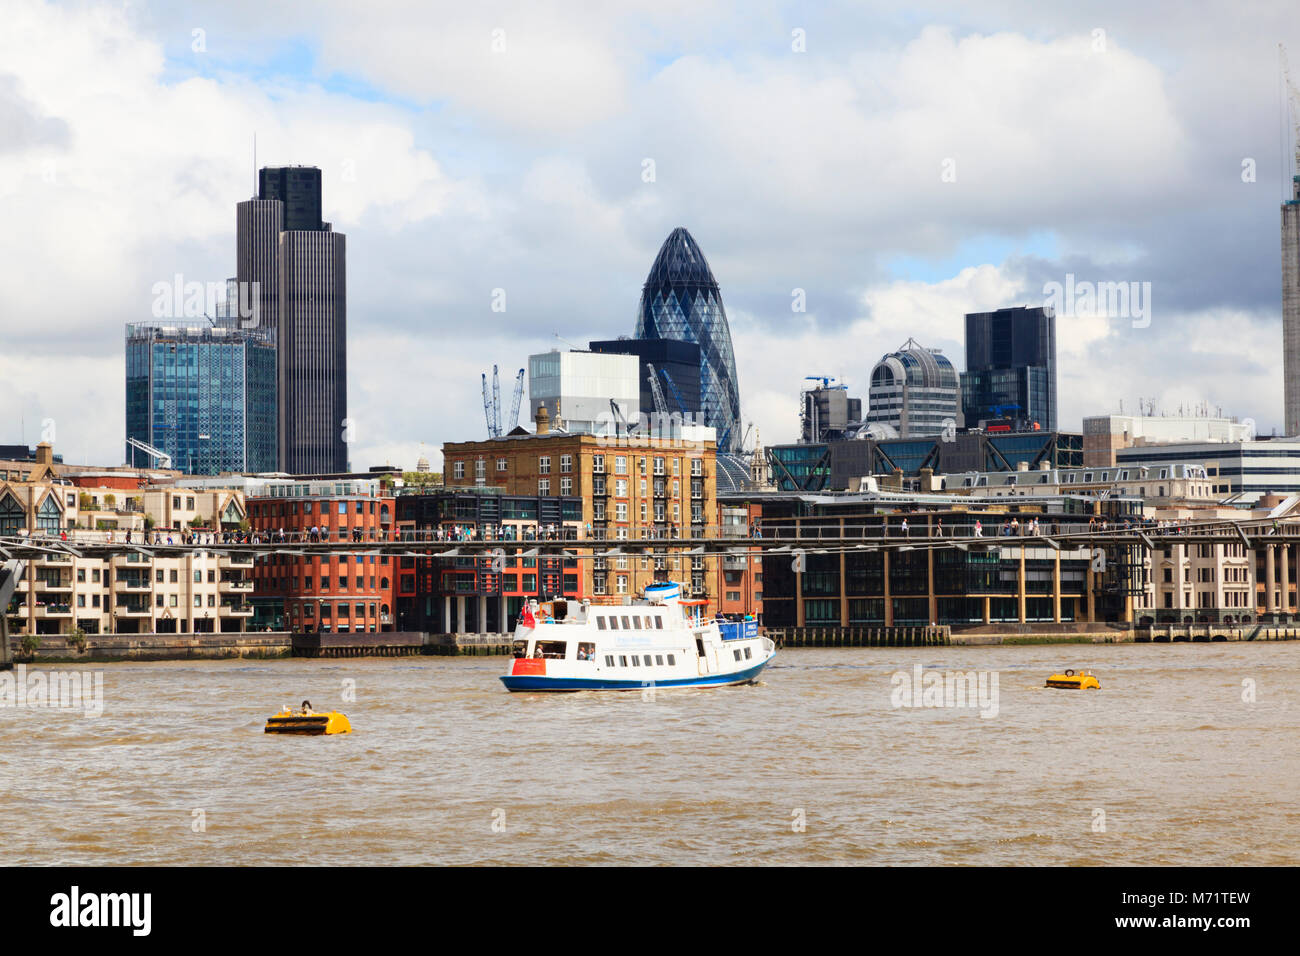 looking across the River Thames at the London skyline with the Gherkin, Stock Photo